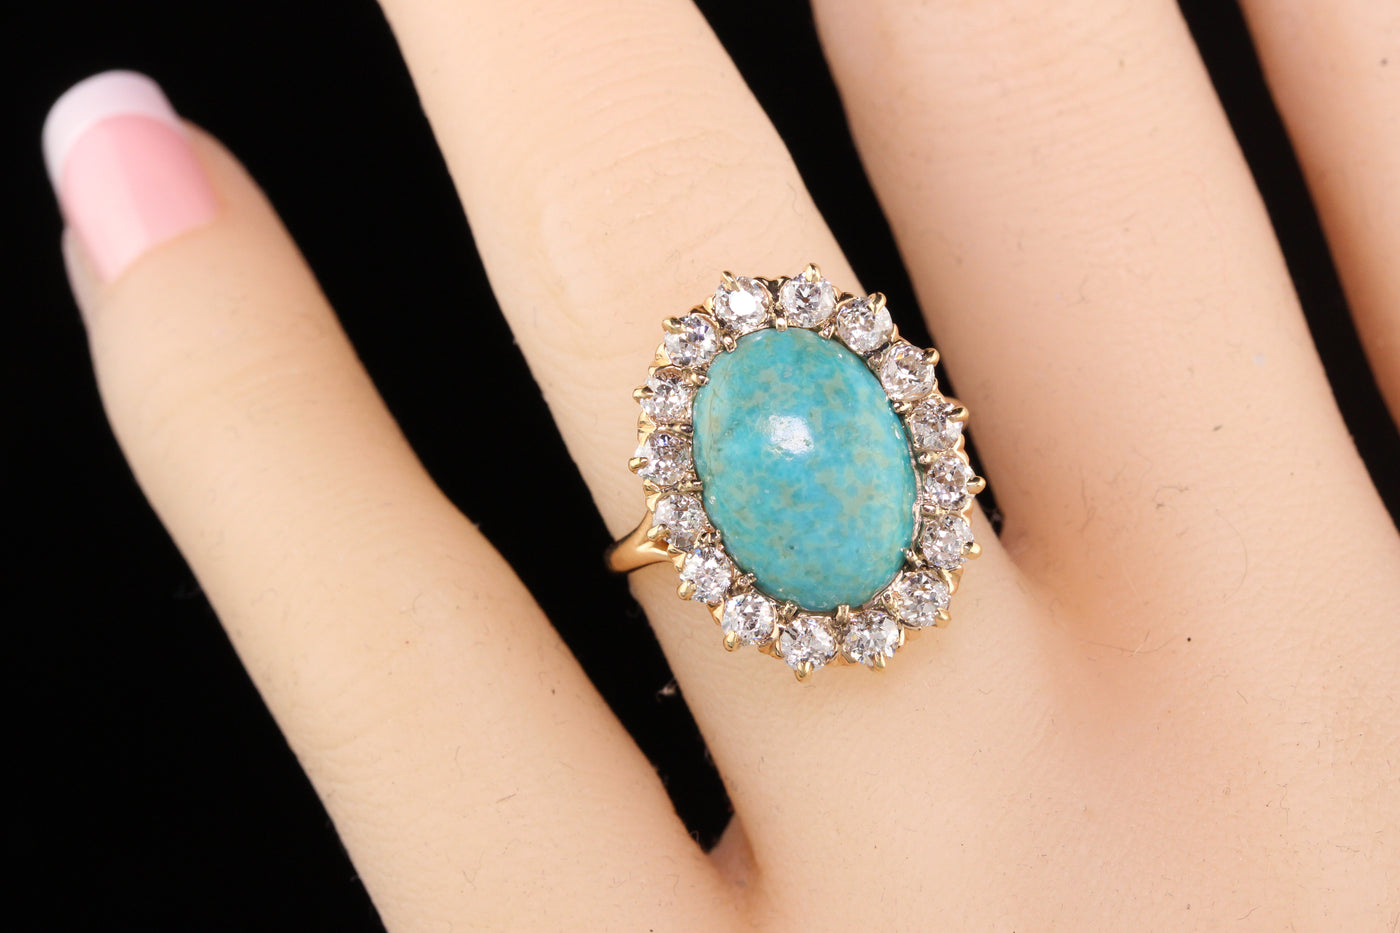 Antique Victorian 14K Rose Gold Old Miner Cut Diamonds and Turquoise Ring